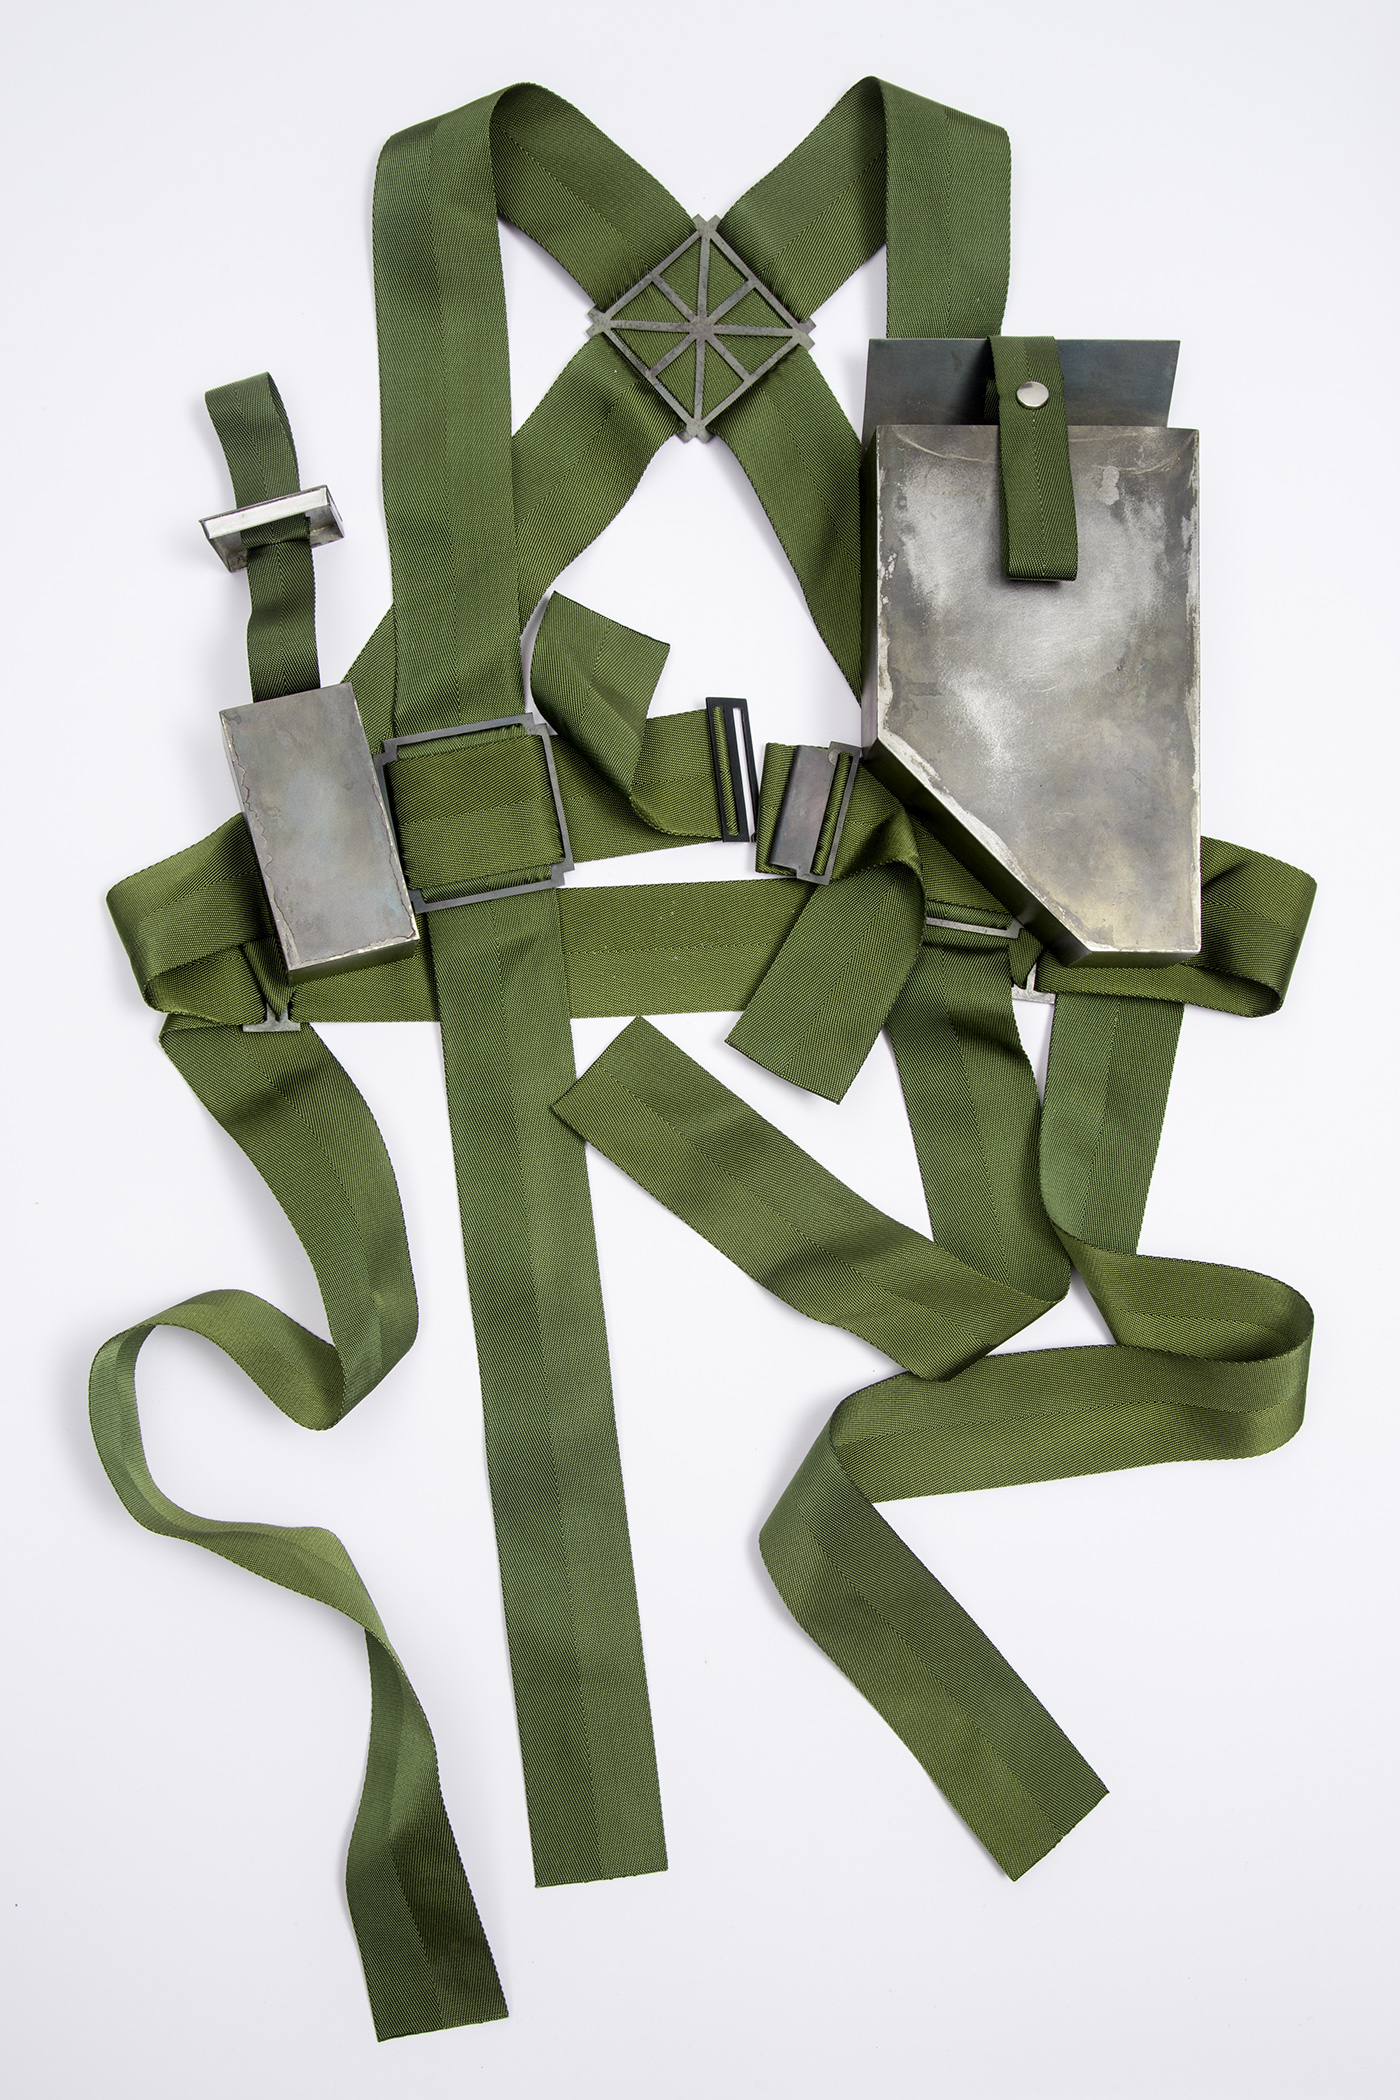 harness container millitary design metalsmithing craft Wearable artist in residence lorenz mager